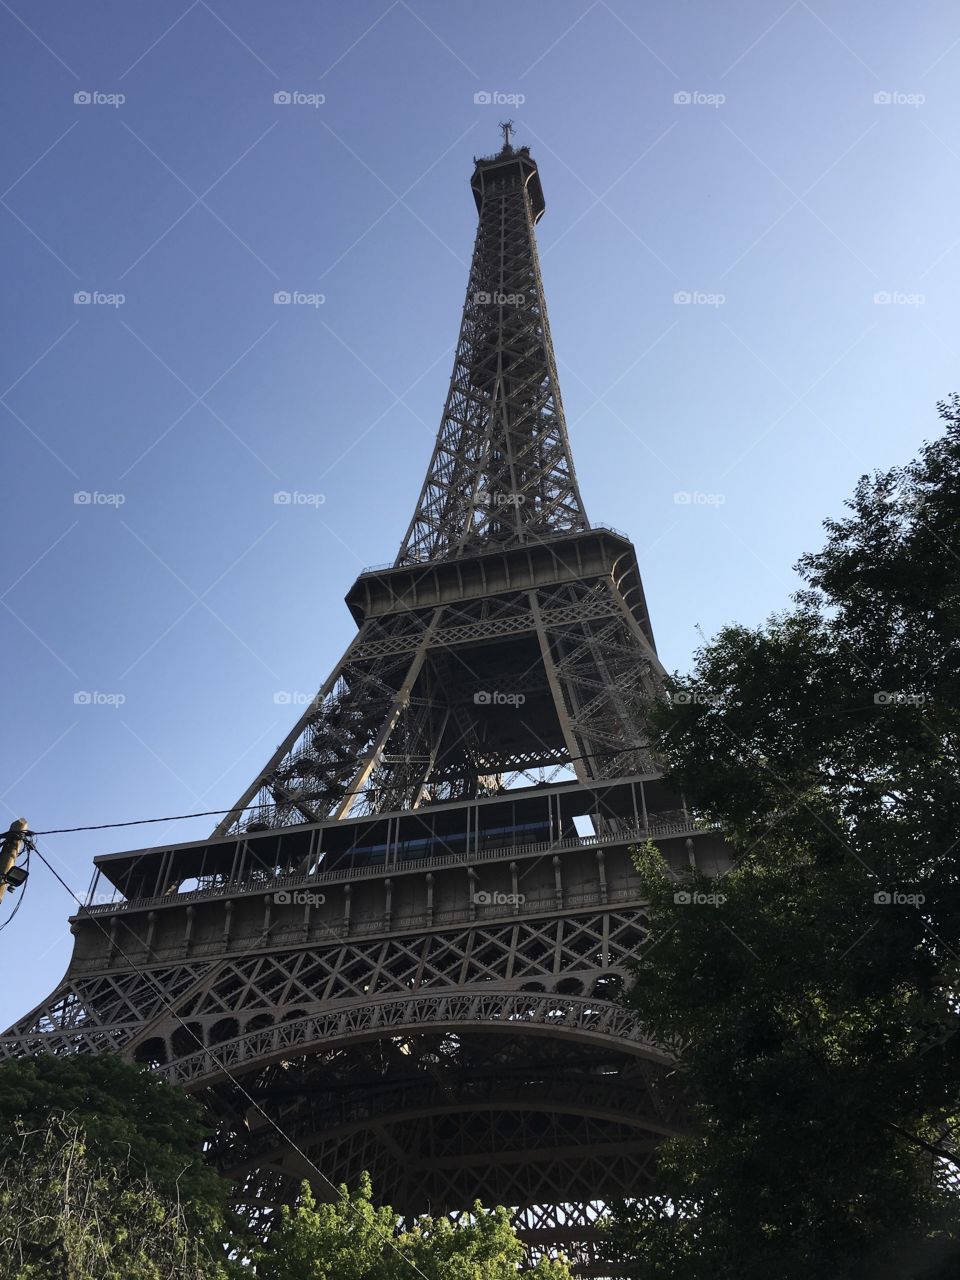 A shot of the Eiffel Tower. The sky is clear and blue. The Eiffel Tower seems to touch the sky.